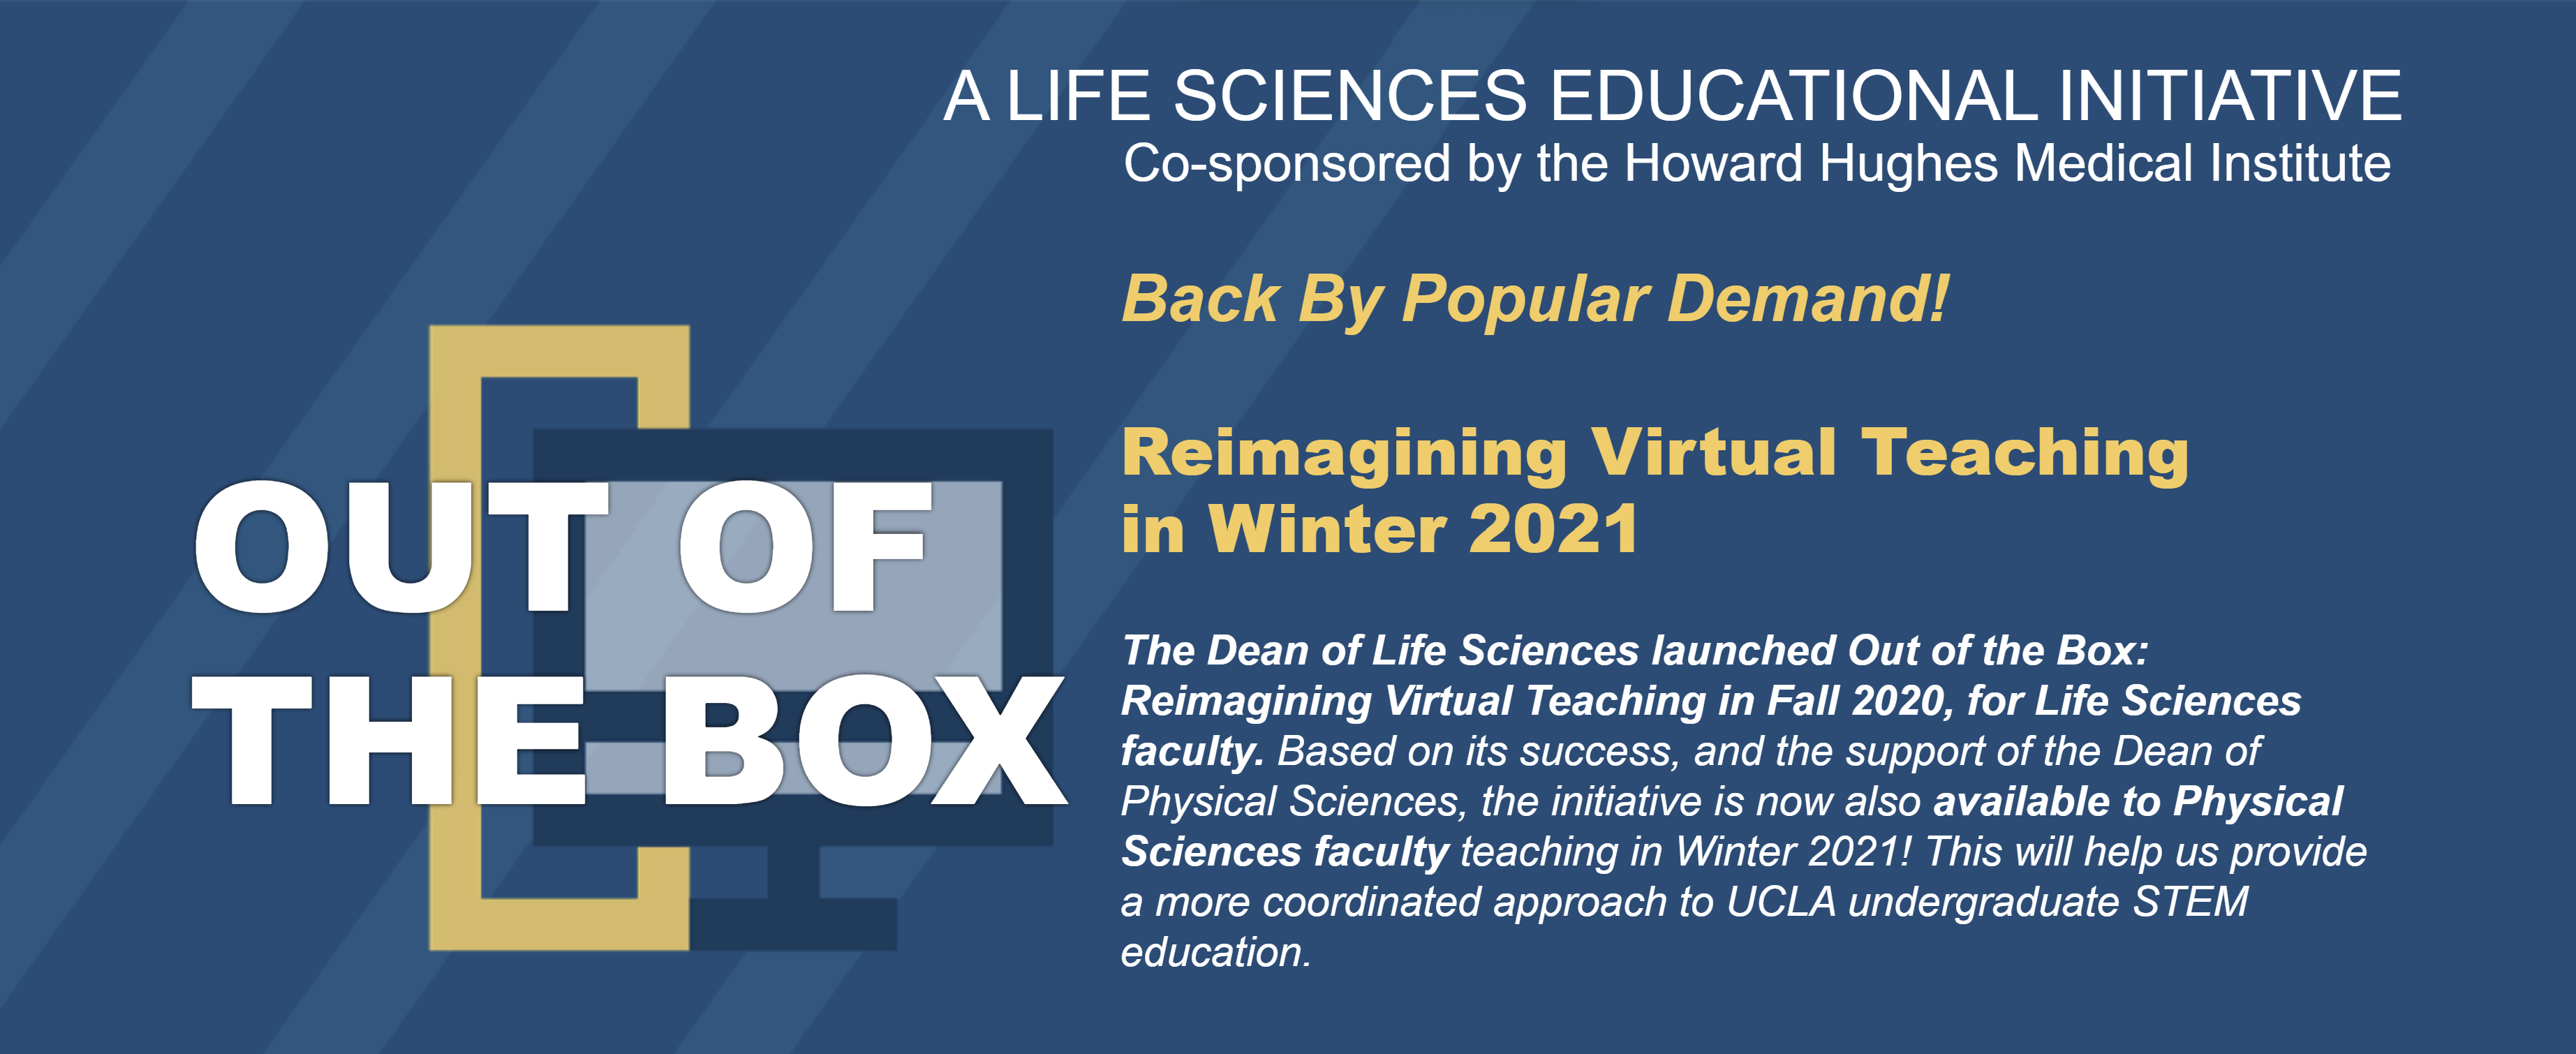 Flyer for the Out of the Box: Reimagining Virtual Teaching in Winter 2021 